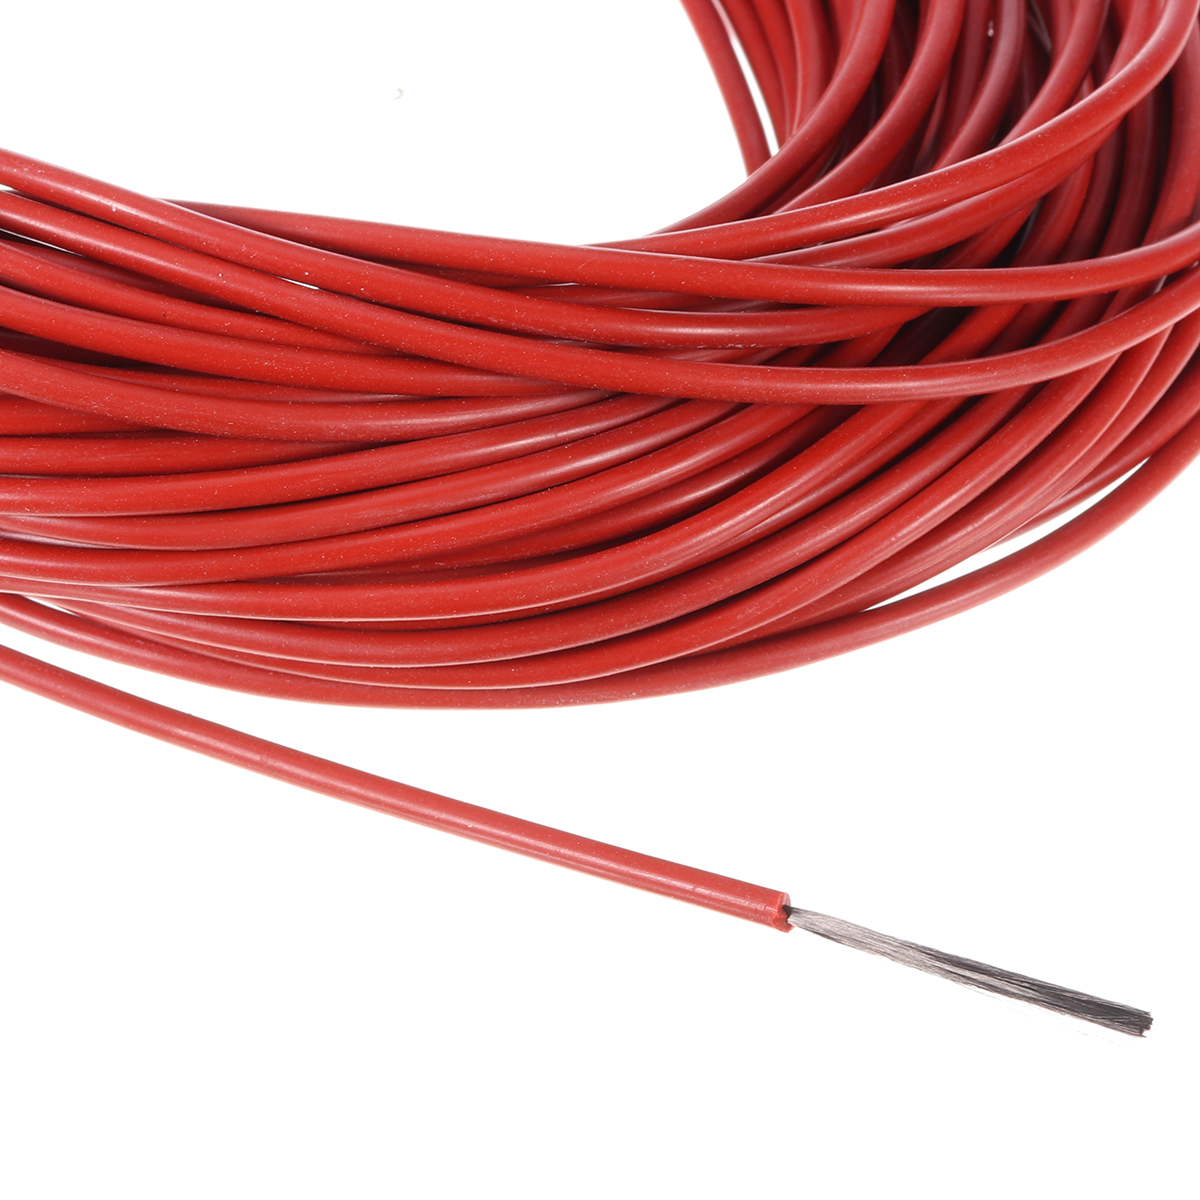 Find 20 200M Carbon Fiber Heating Wire Silicone Rubber Infrared Heating Cable 33ohm for Sale on Gipsybee.com with cryptocurrencies